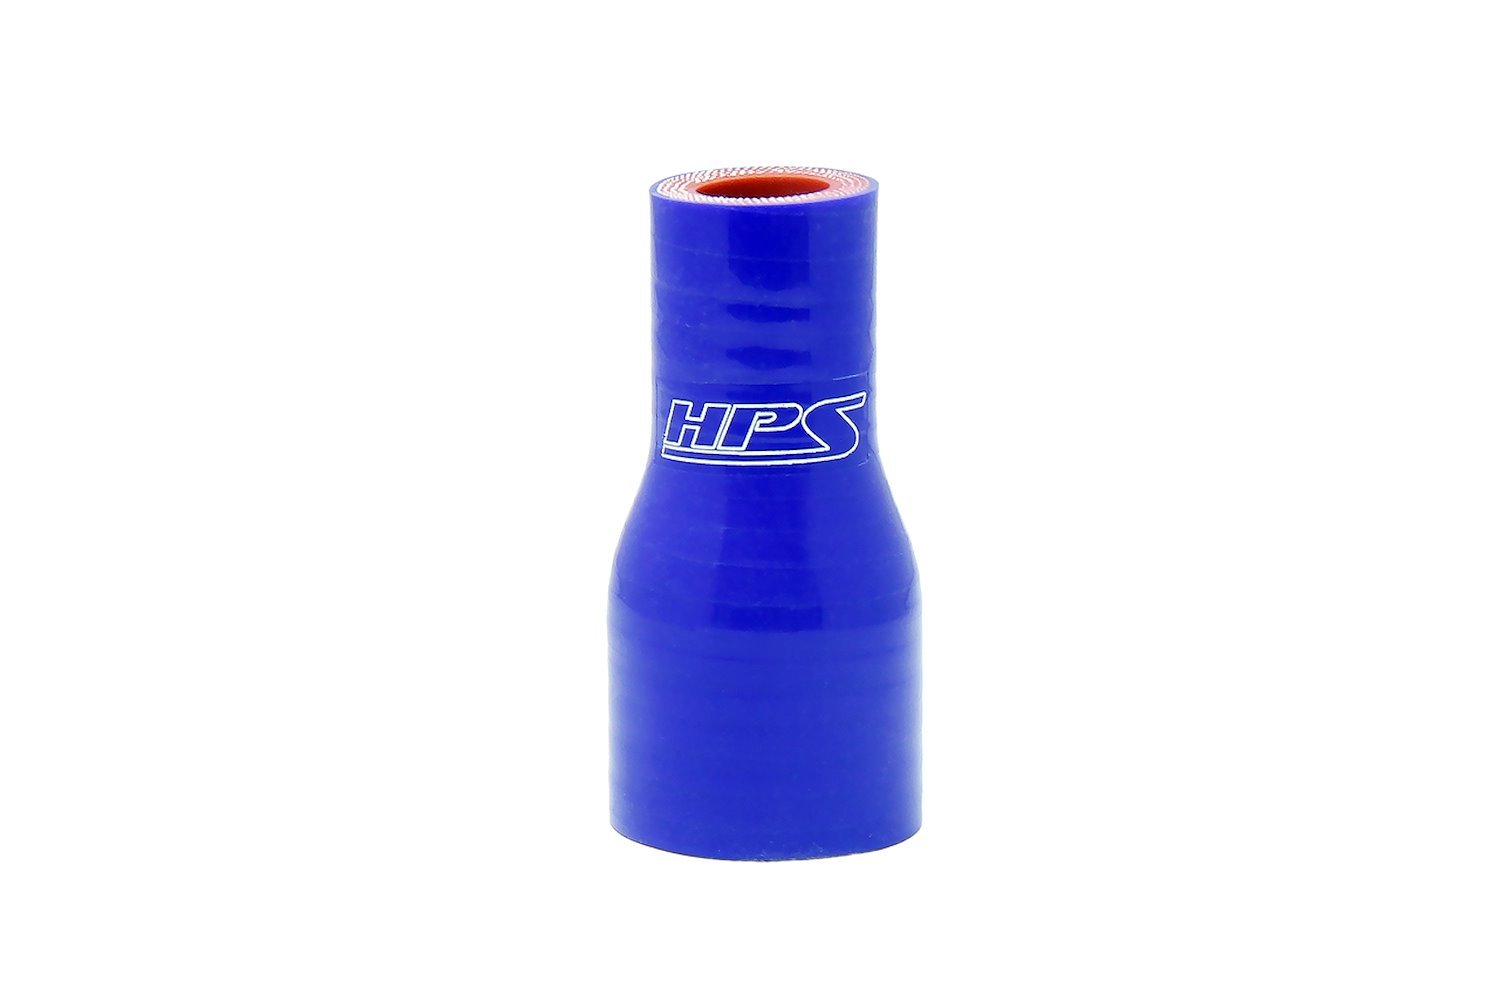 HTSR-125-200-L4-BLUE Silicone Reducer Hose, High-Temp 4-Ply Reinforced, 1-1/4 in. - 2 in. ID, 4 in. Long, Blue